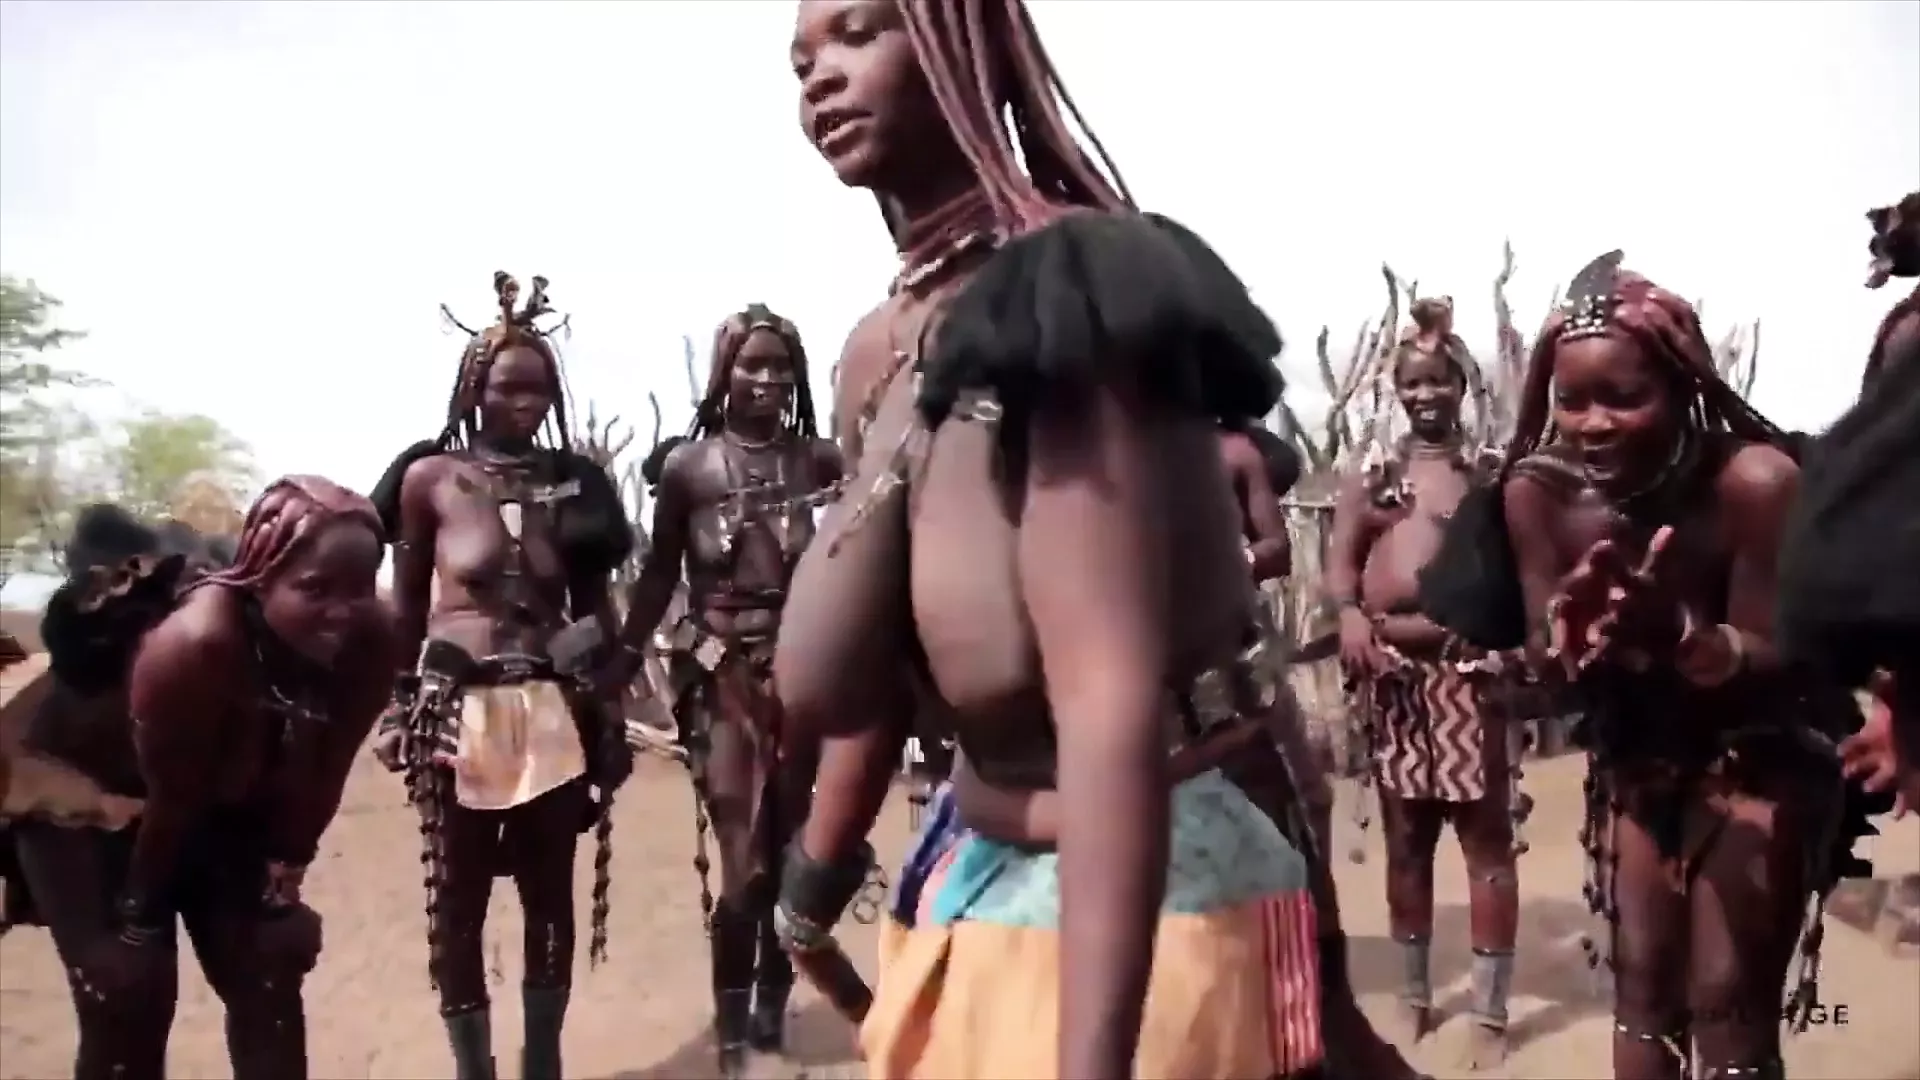 African Tribes Women Having Sex - African Himba Women Dance and Swing Their Saggy Tits Around | xHamster